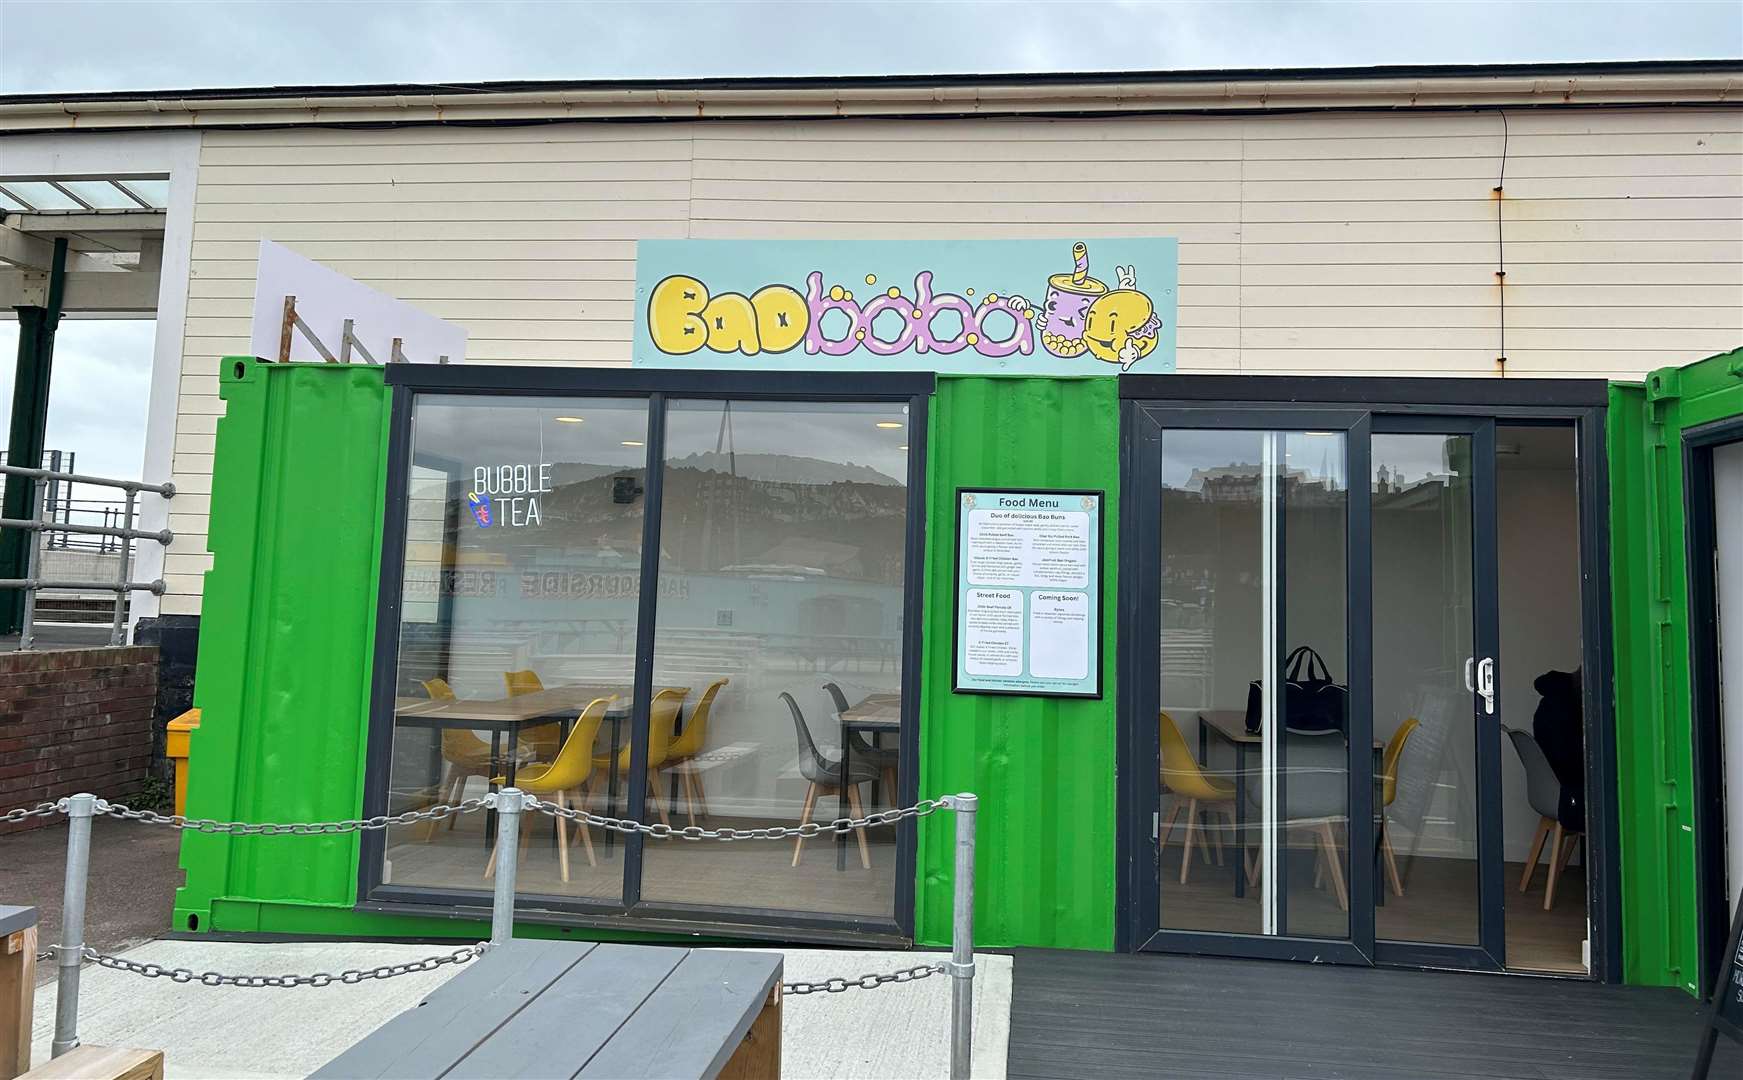 Baoboba opened its first site in August